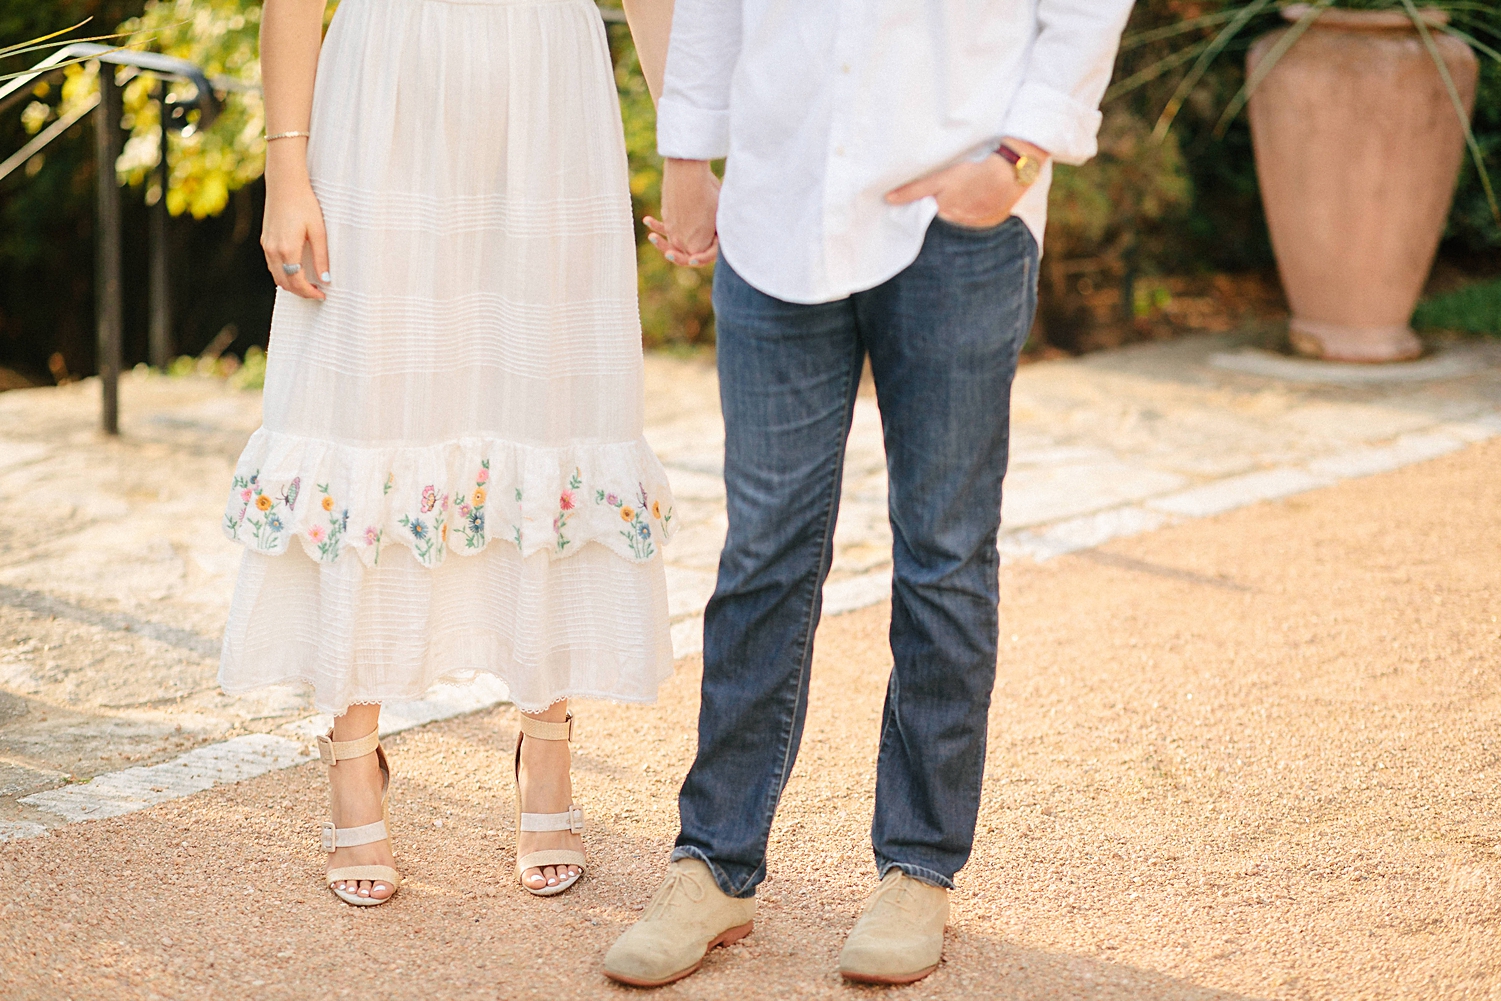 legs of boy in white shirt holding hands with girl in white dress